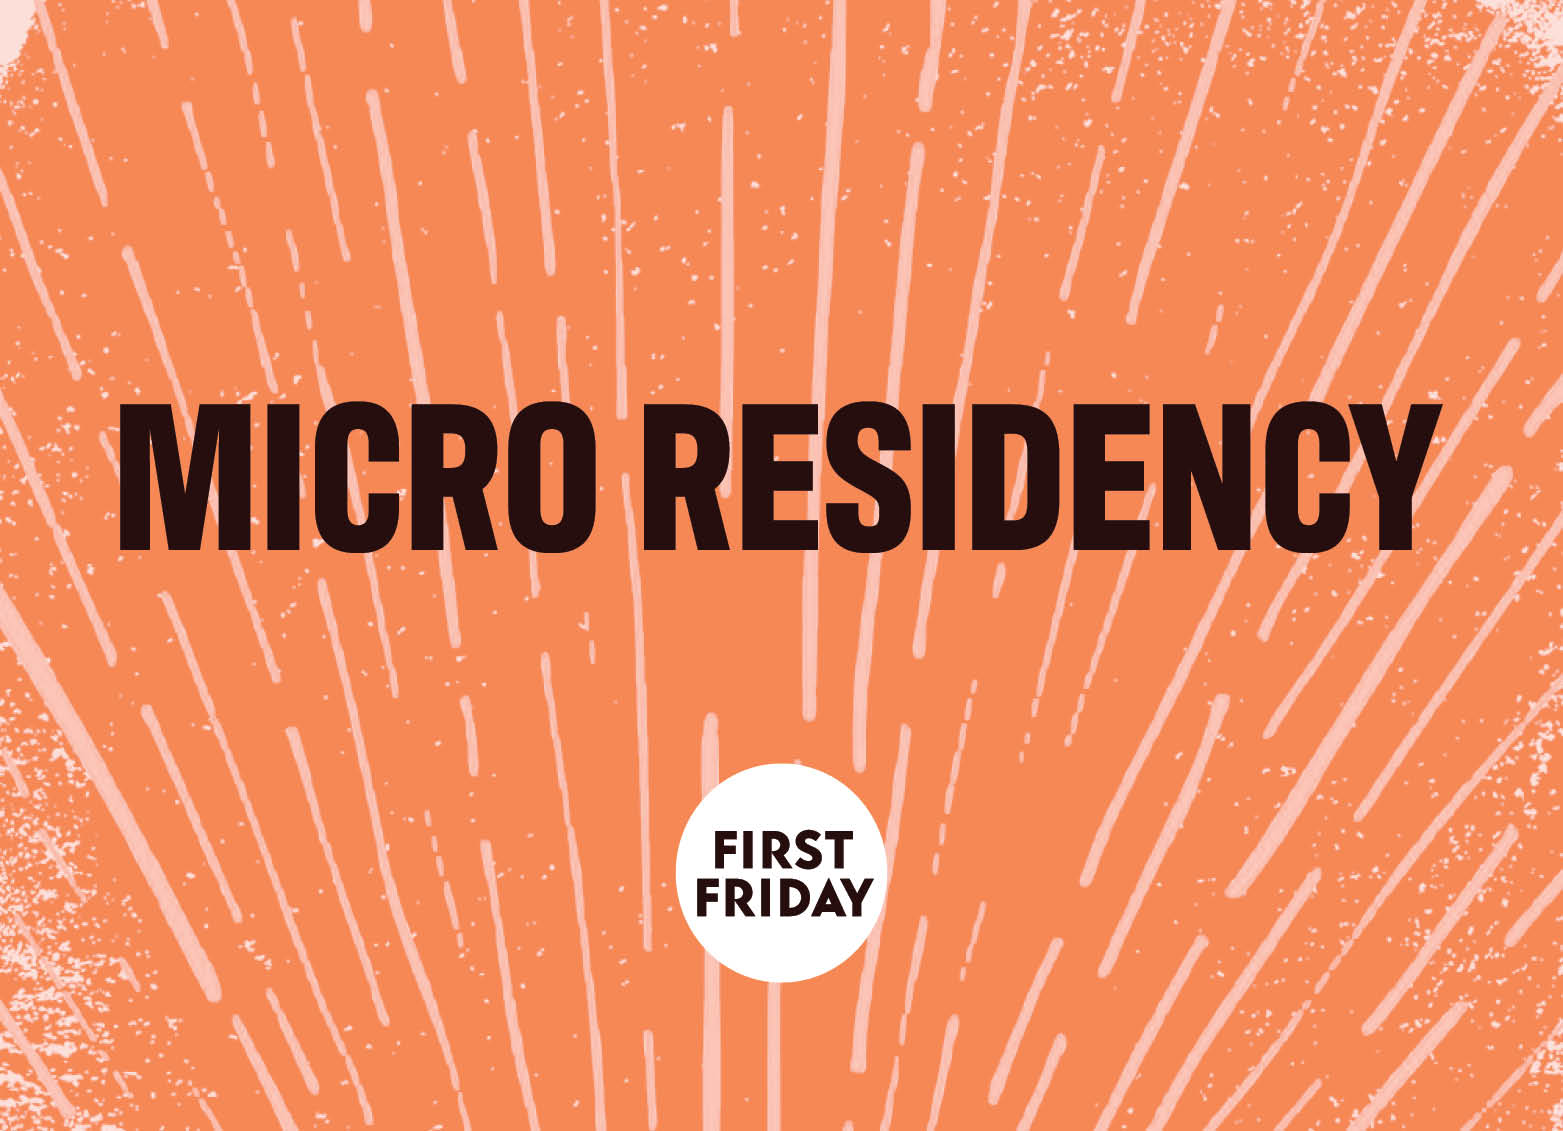 Stanley Museum of Art First Friday: April 2020 - Micro residency